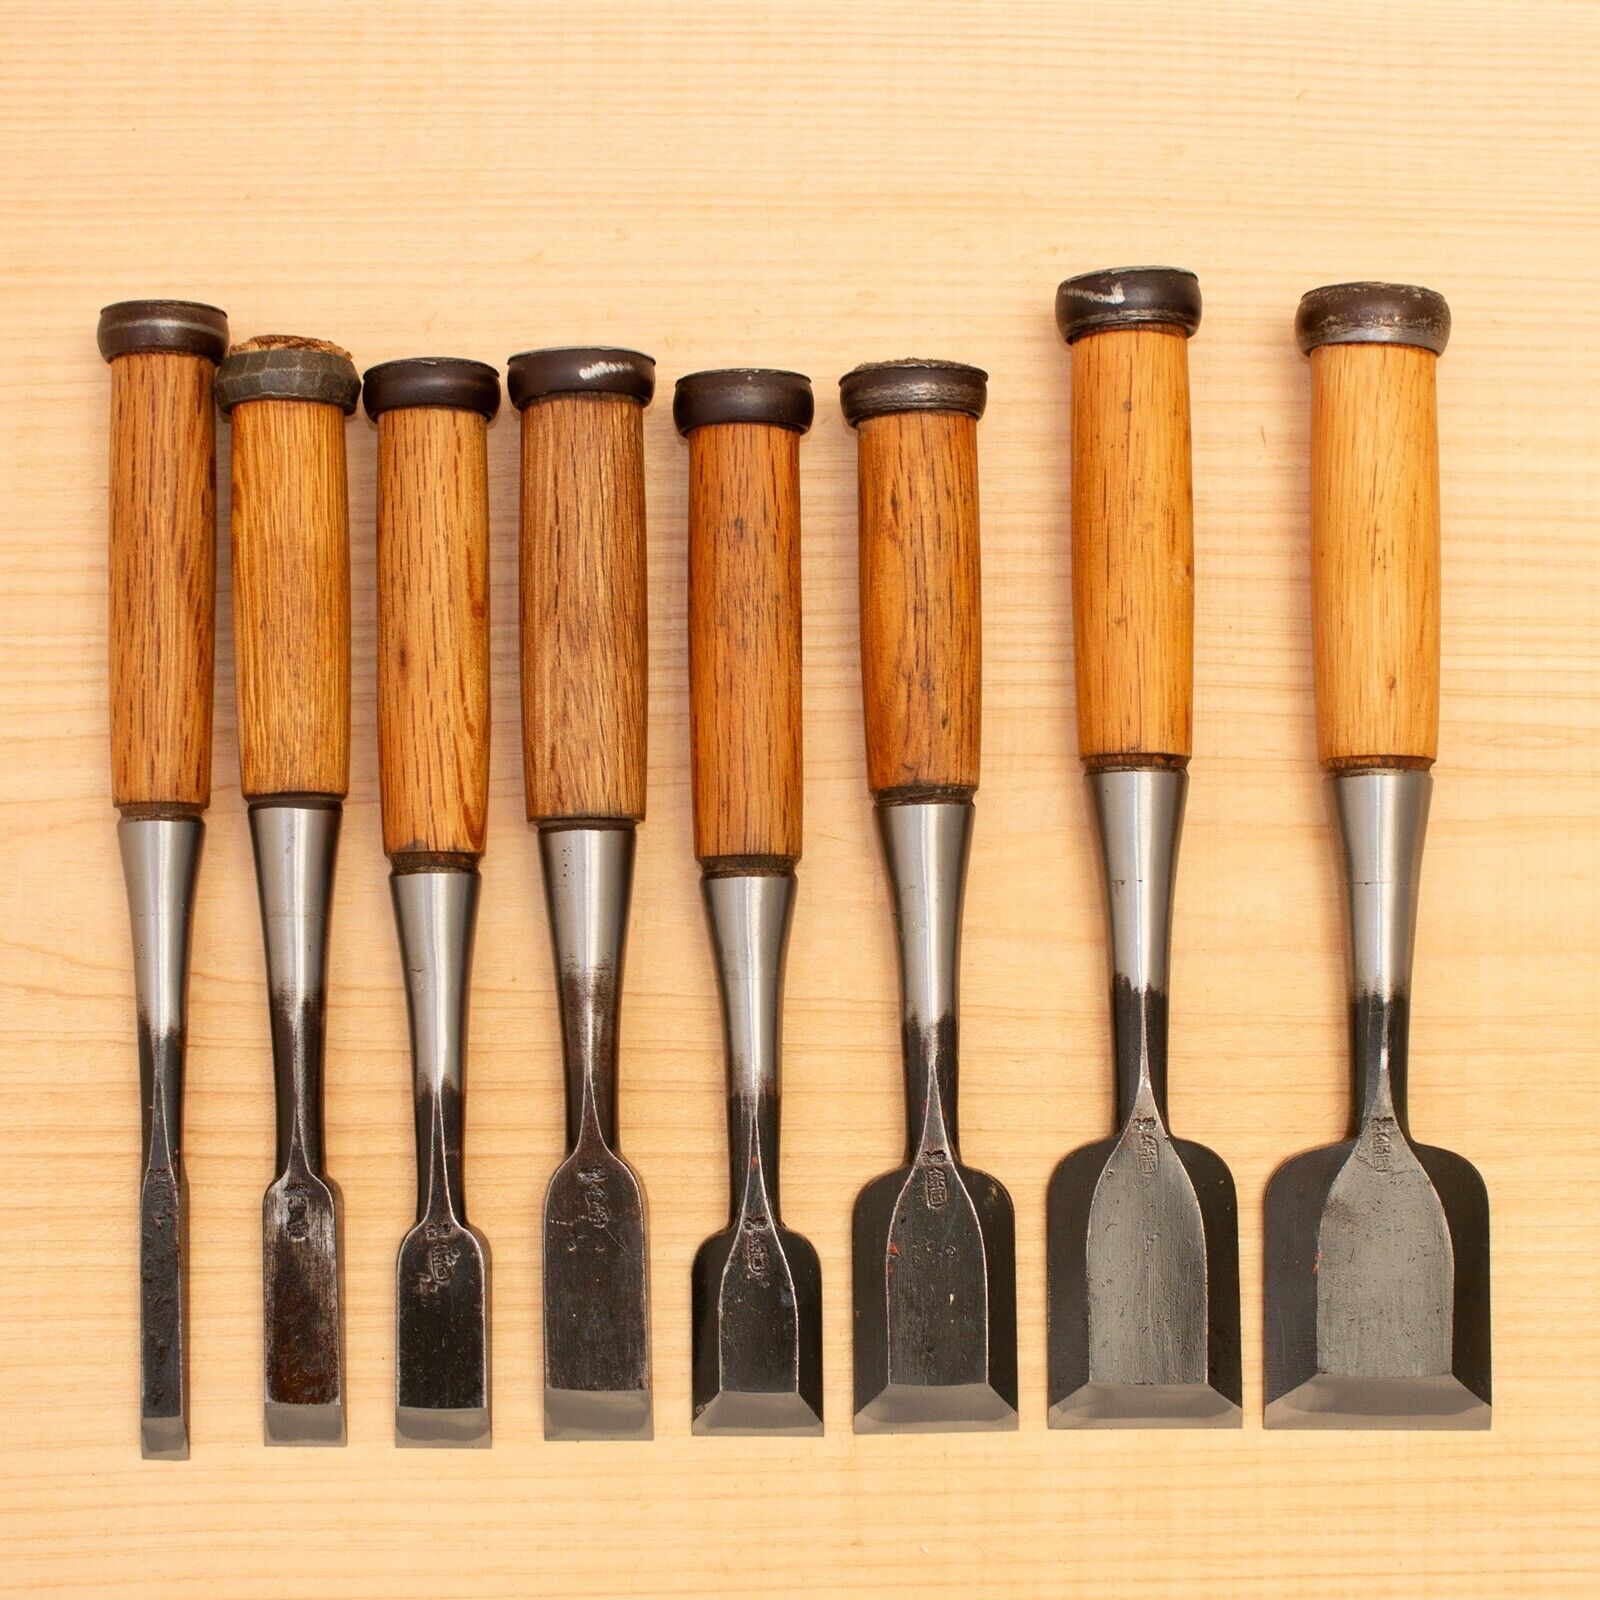 Japanese Chisel Set of 8 Hand Tool wood working #487